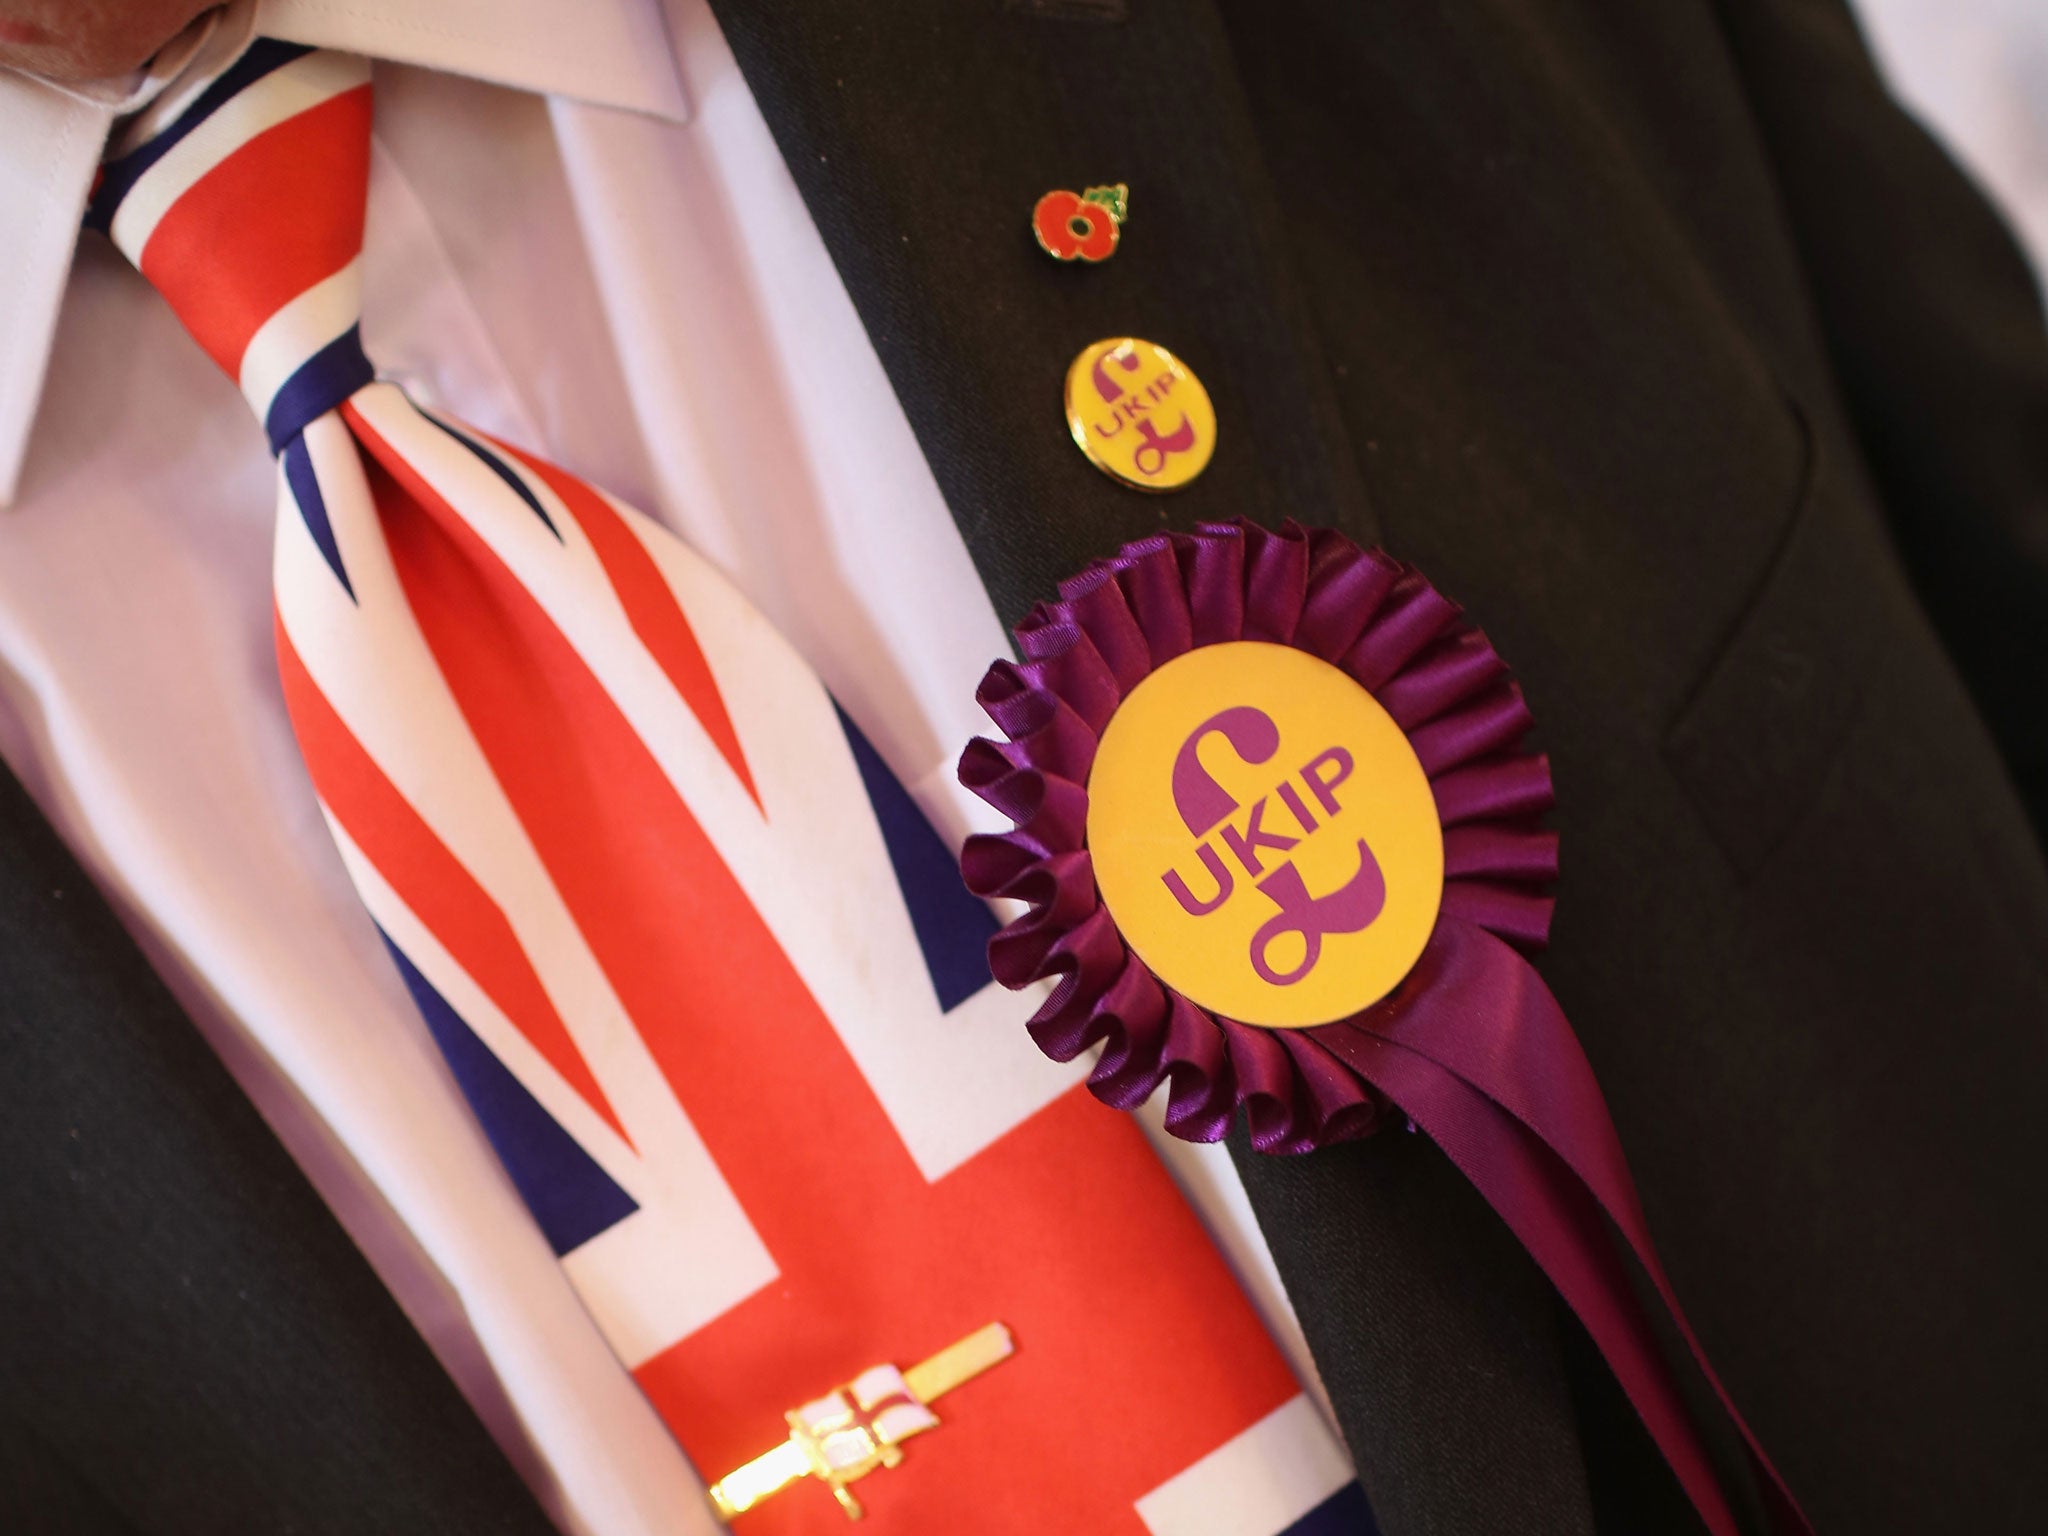 A delegate sporting a Union Flag tie attends the UKIP annual party conference at Central Hall, Westminster on September 21, 2013 in London, England.